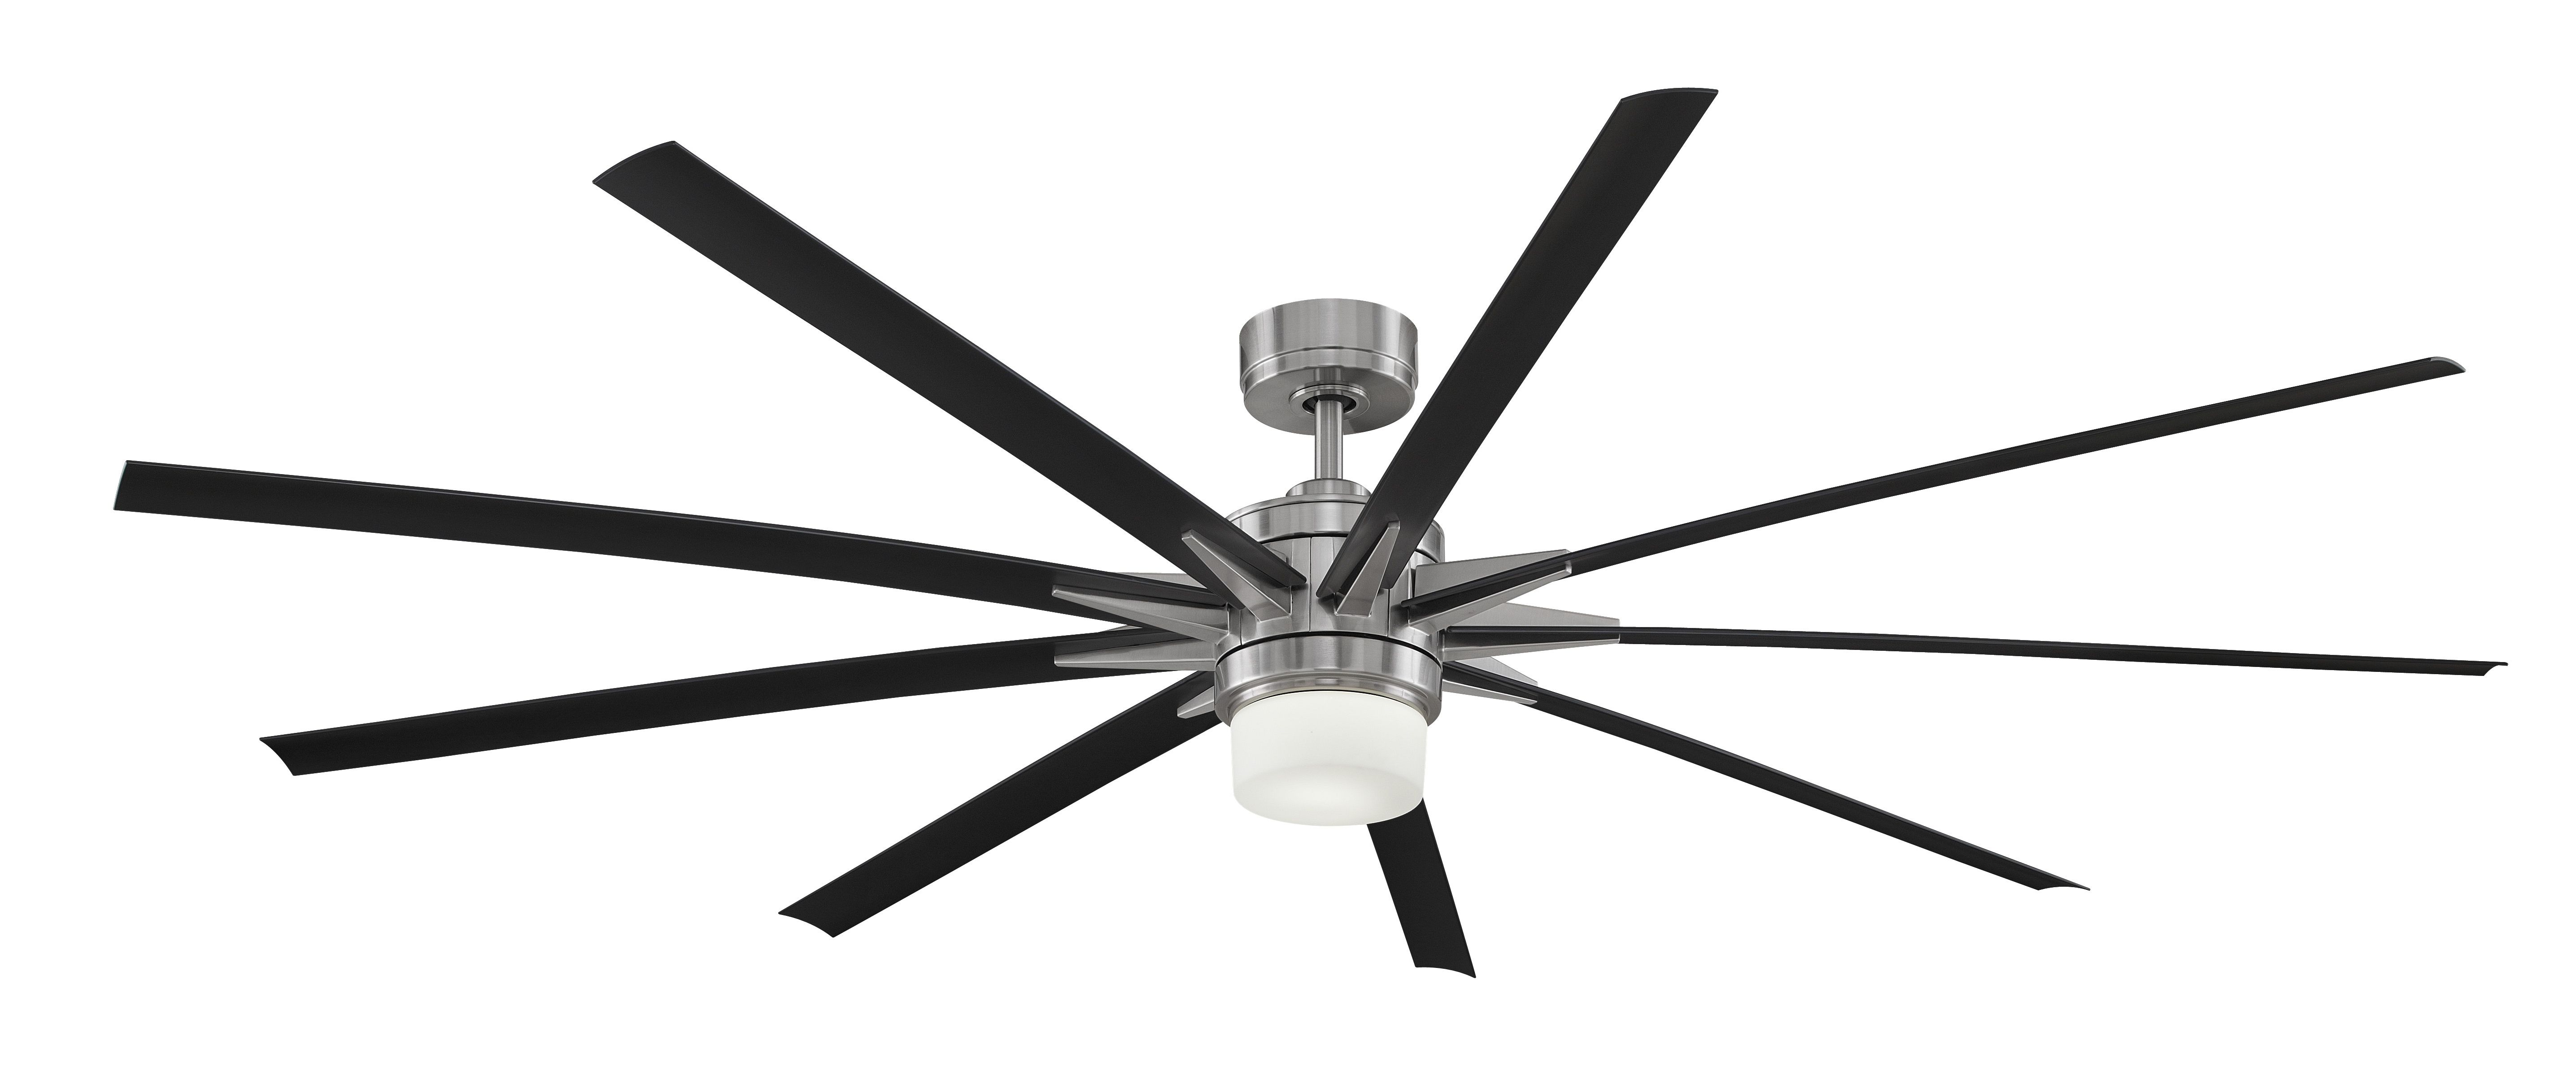 Fashionable 72 Inch Outdoor Ceiling Fans With Light Regarding Large Ceiling Fans With Lights Great Modern Ceiling Lights (View 20 of 20)